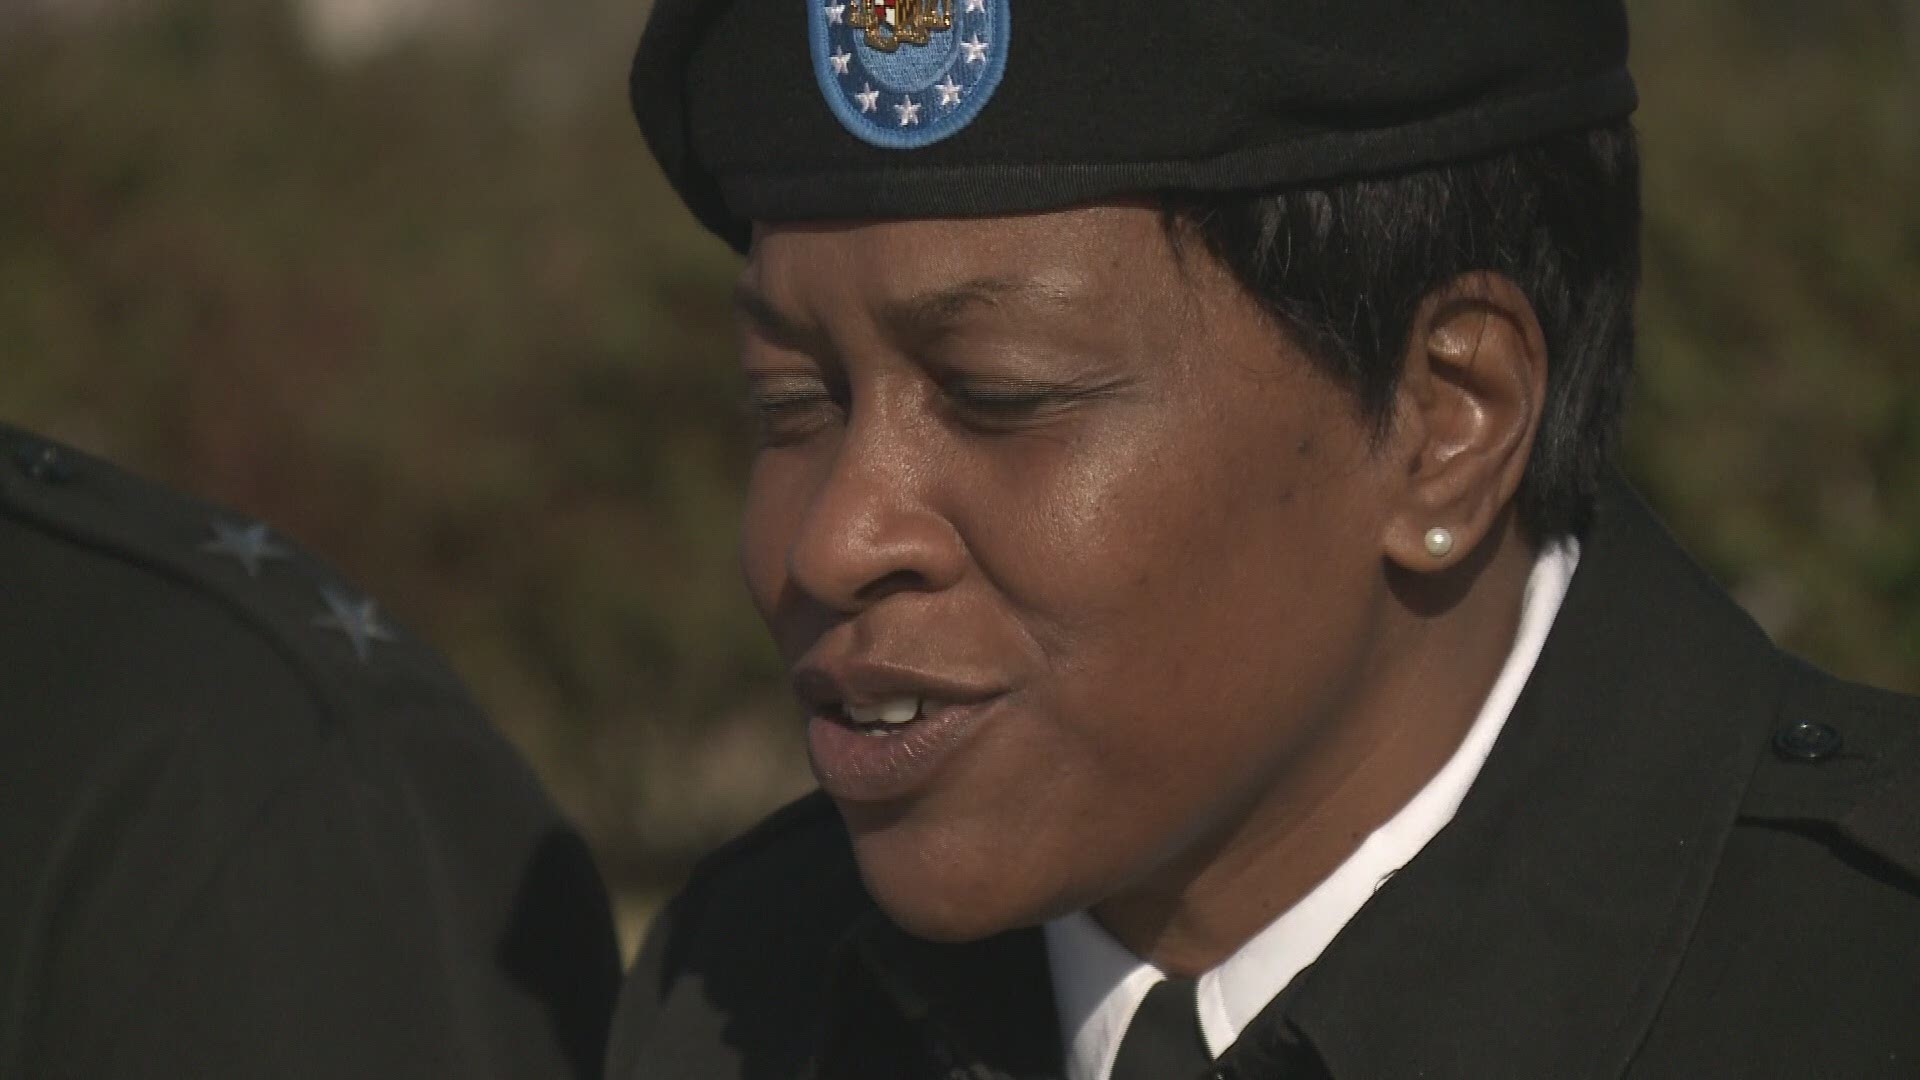 Nationwide, it's rare to find a woman in the top job in a state's national guard. But in Maryland, they've gone a step further, with women in all four of the top leadership roles.